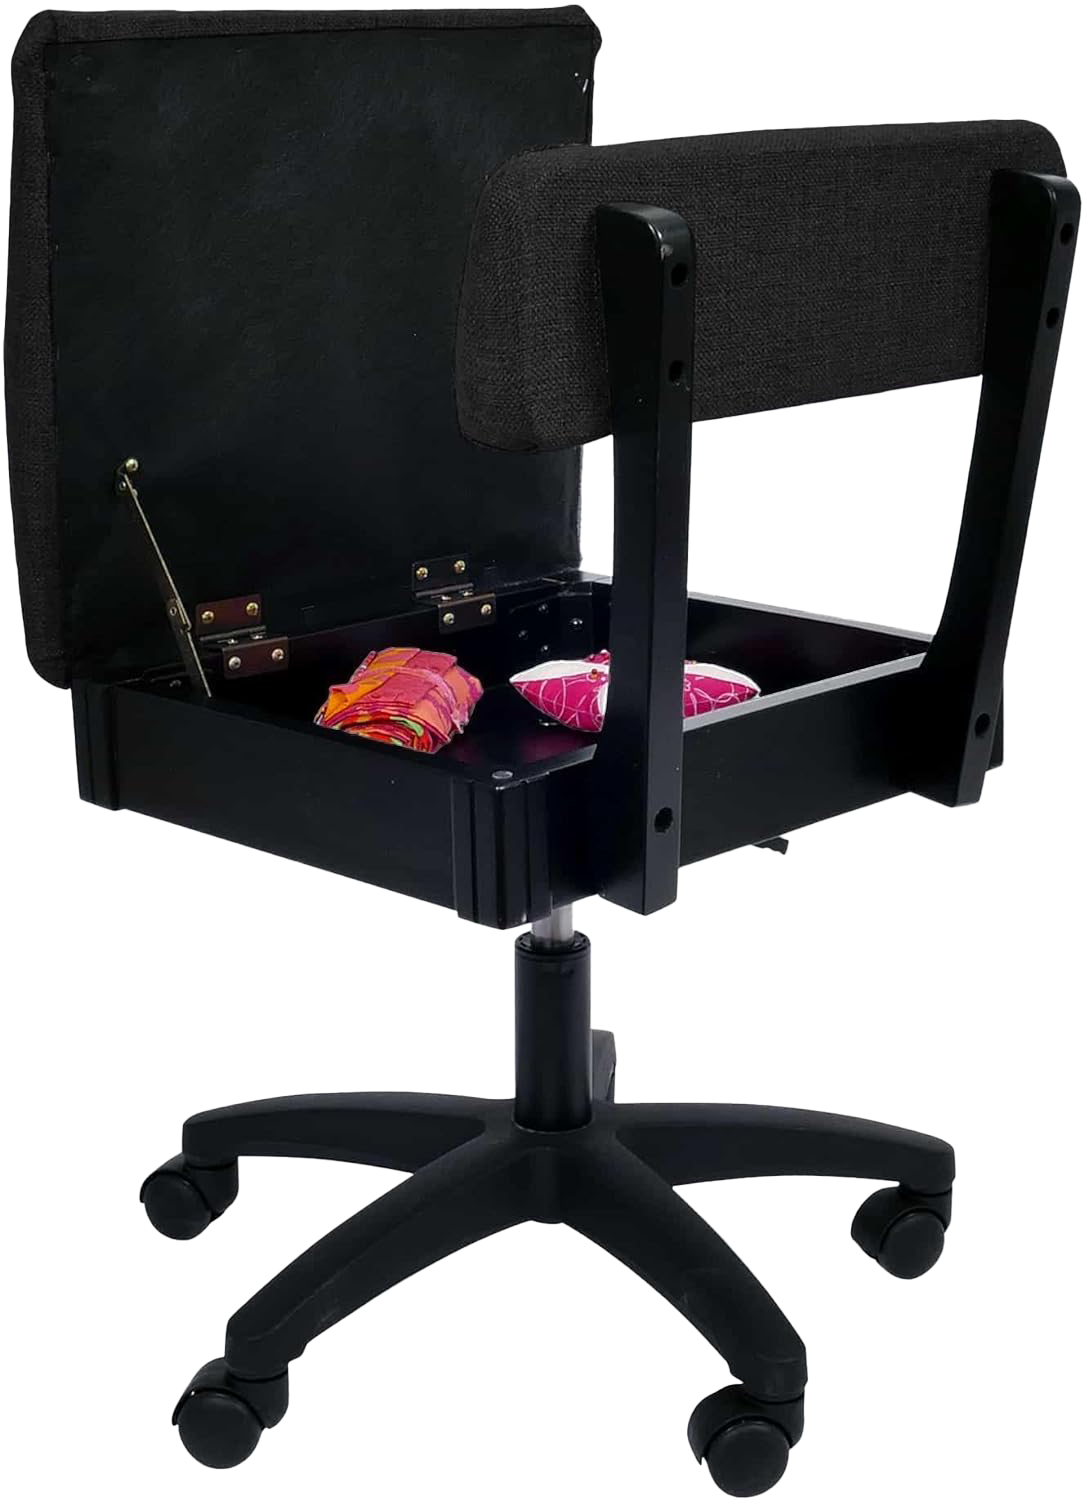 Arrow Sewing Height Adjustable Hydraulic Sewing Chair H170 Baroness Black for Sale at World Weidner